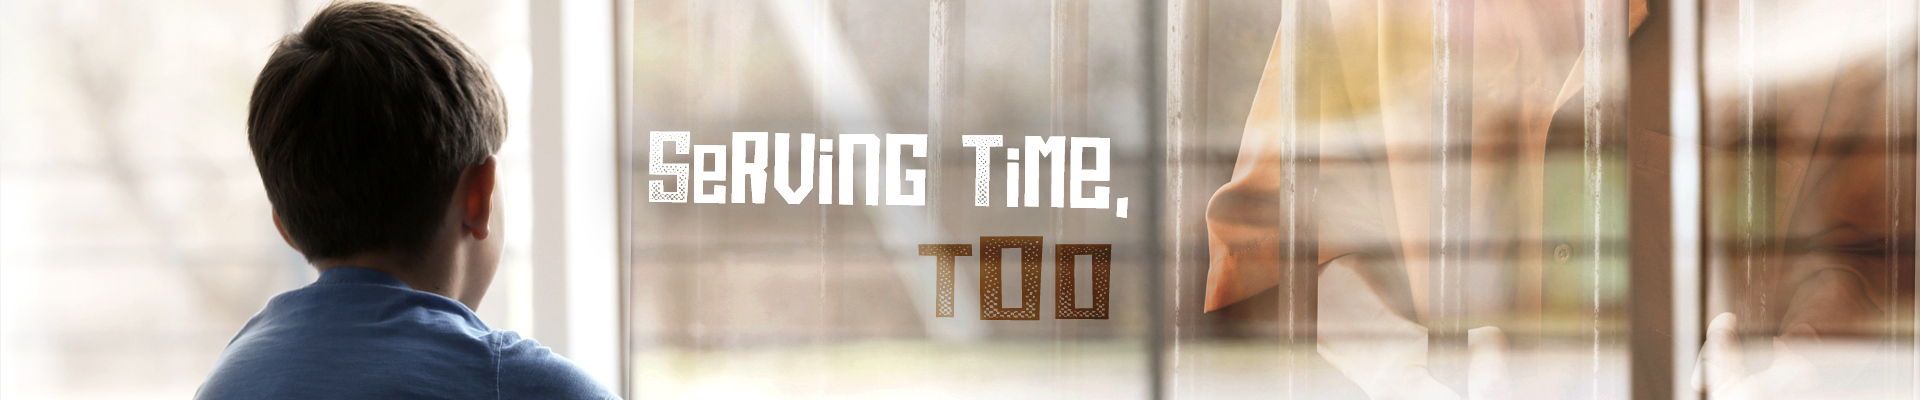 Serving Time title card. Young boy looks out the window with bars overlay